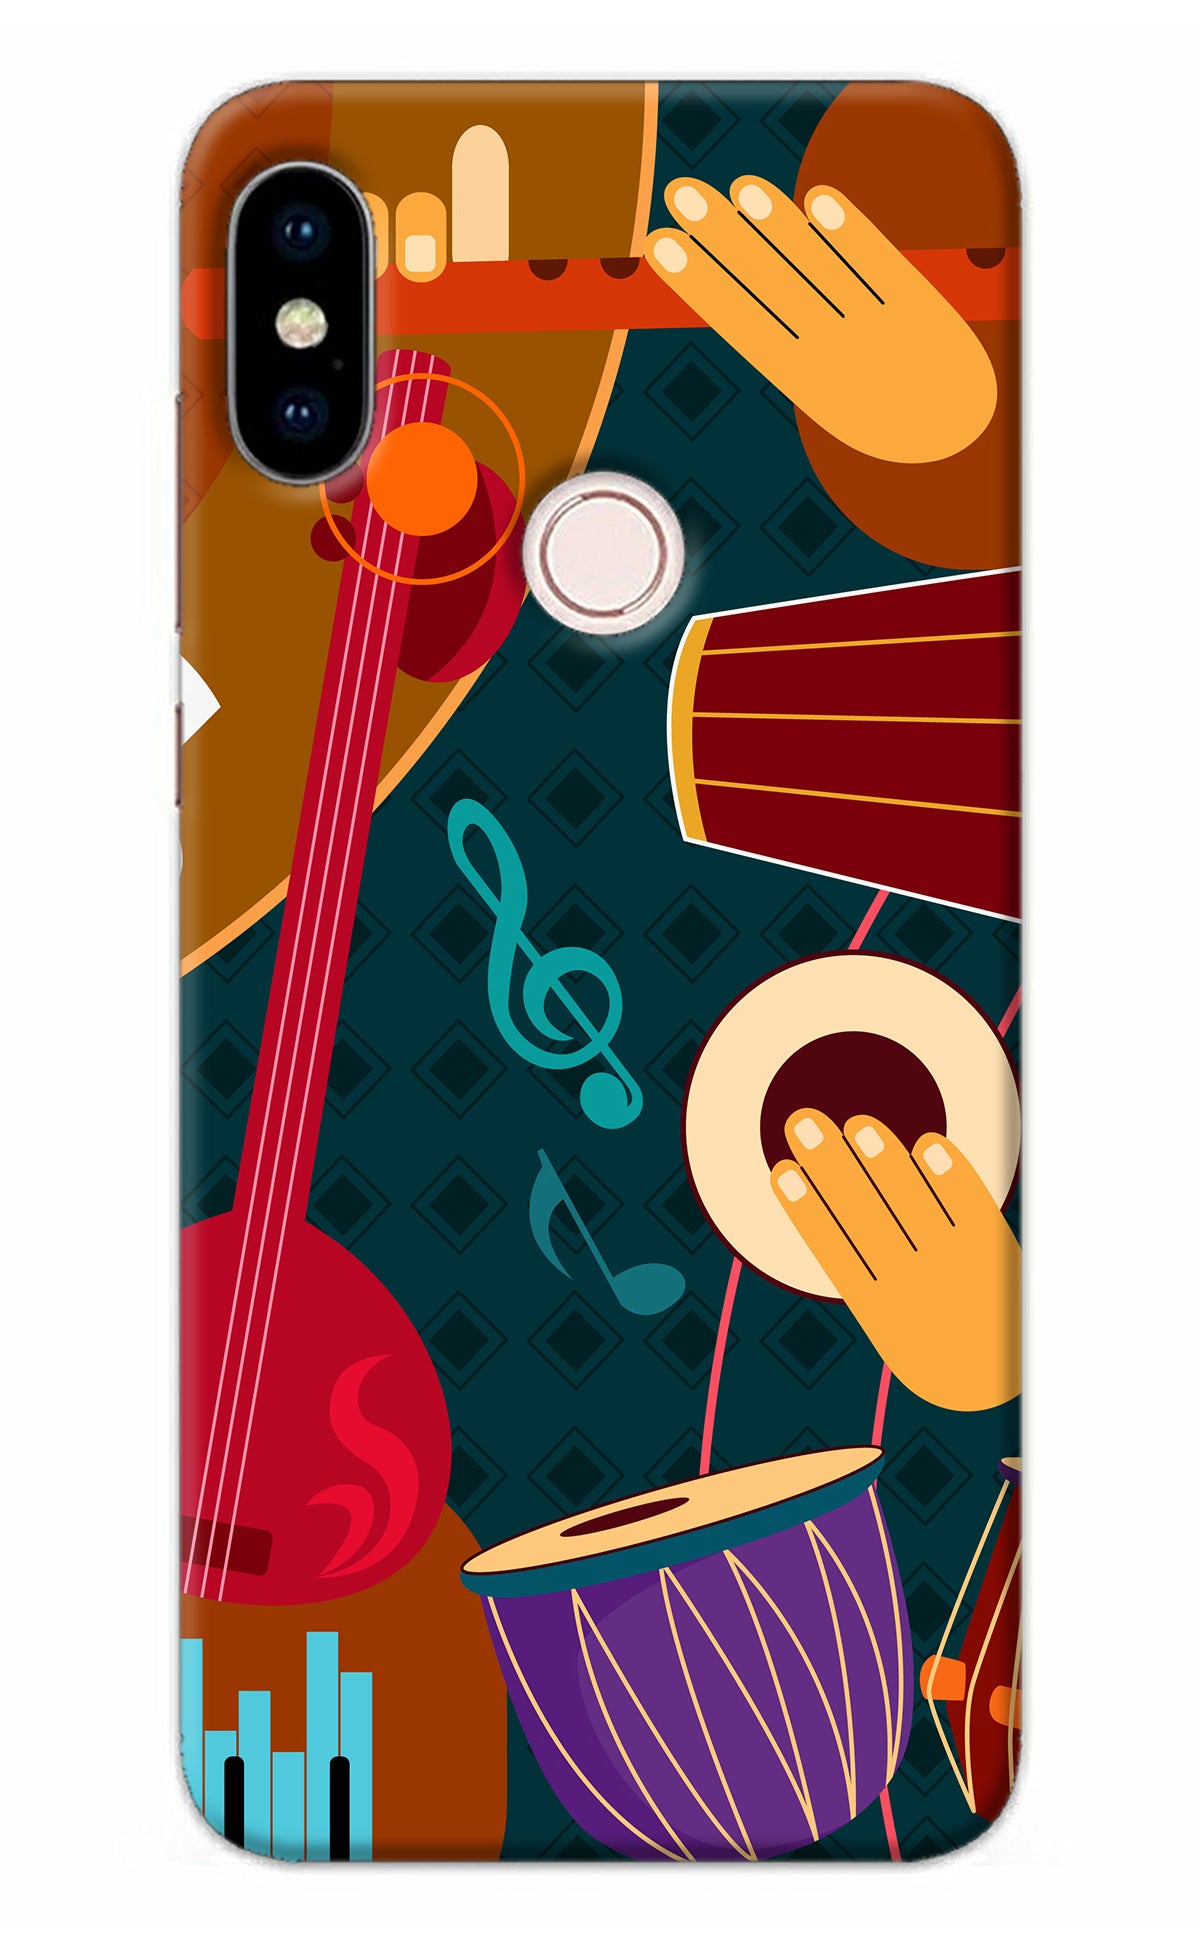 Music Instrument Redmi Note 5 Pro Back Cover